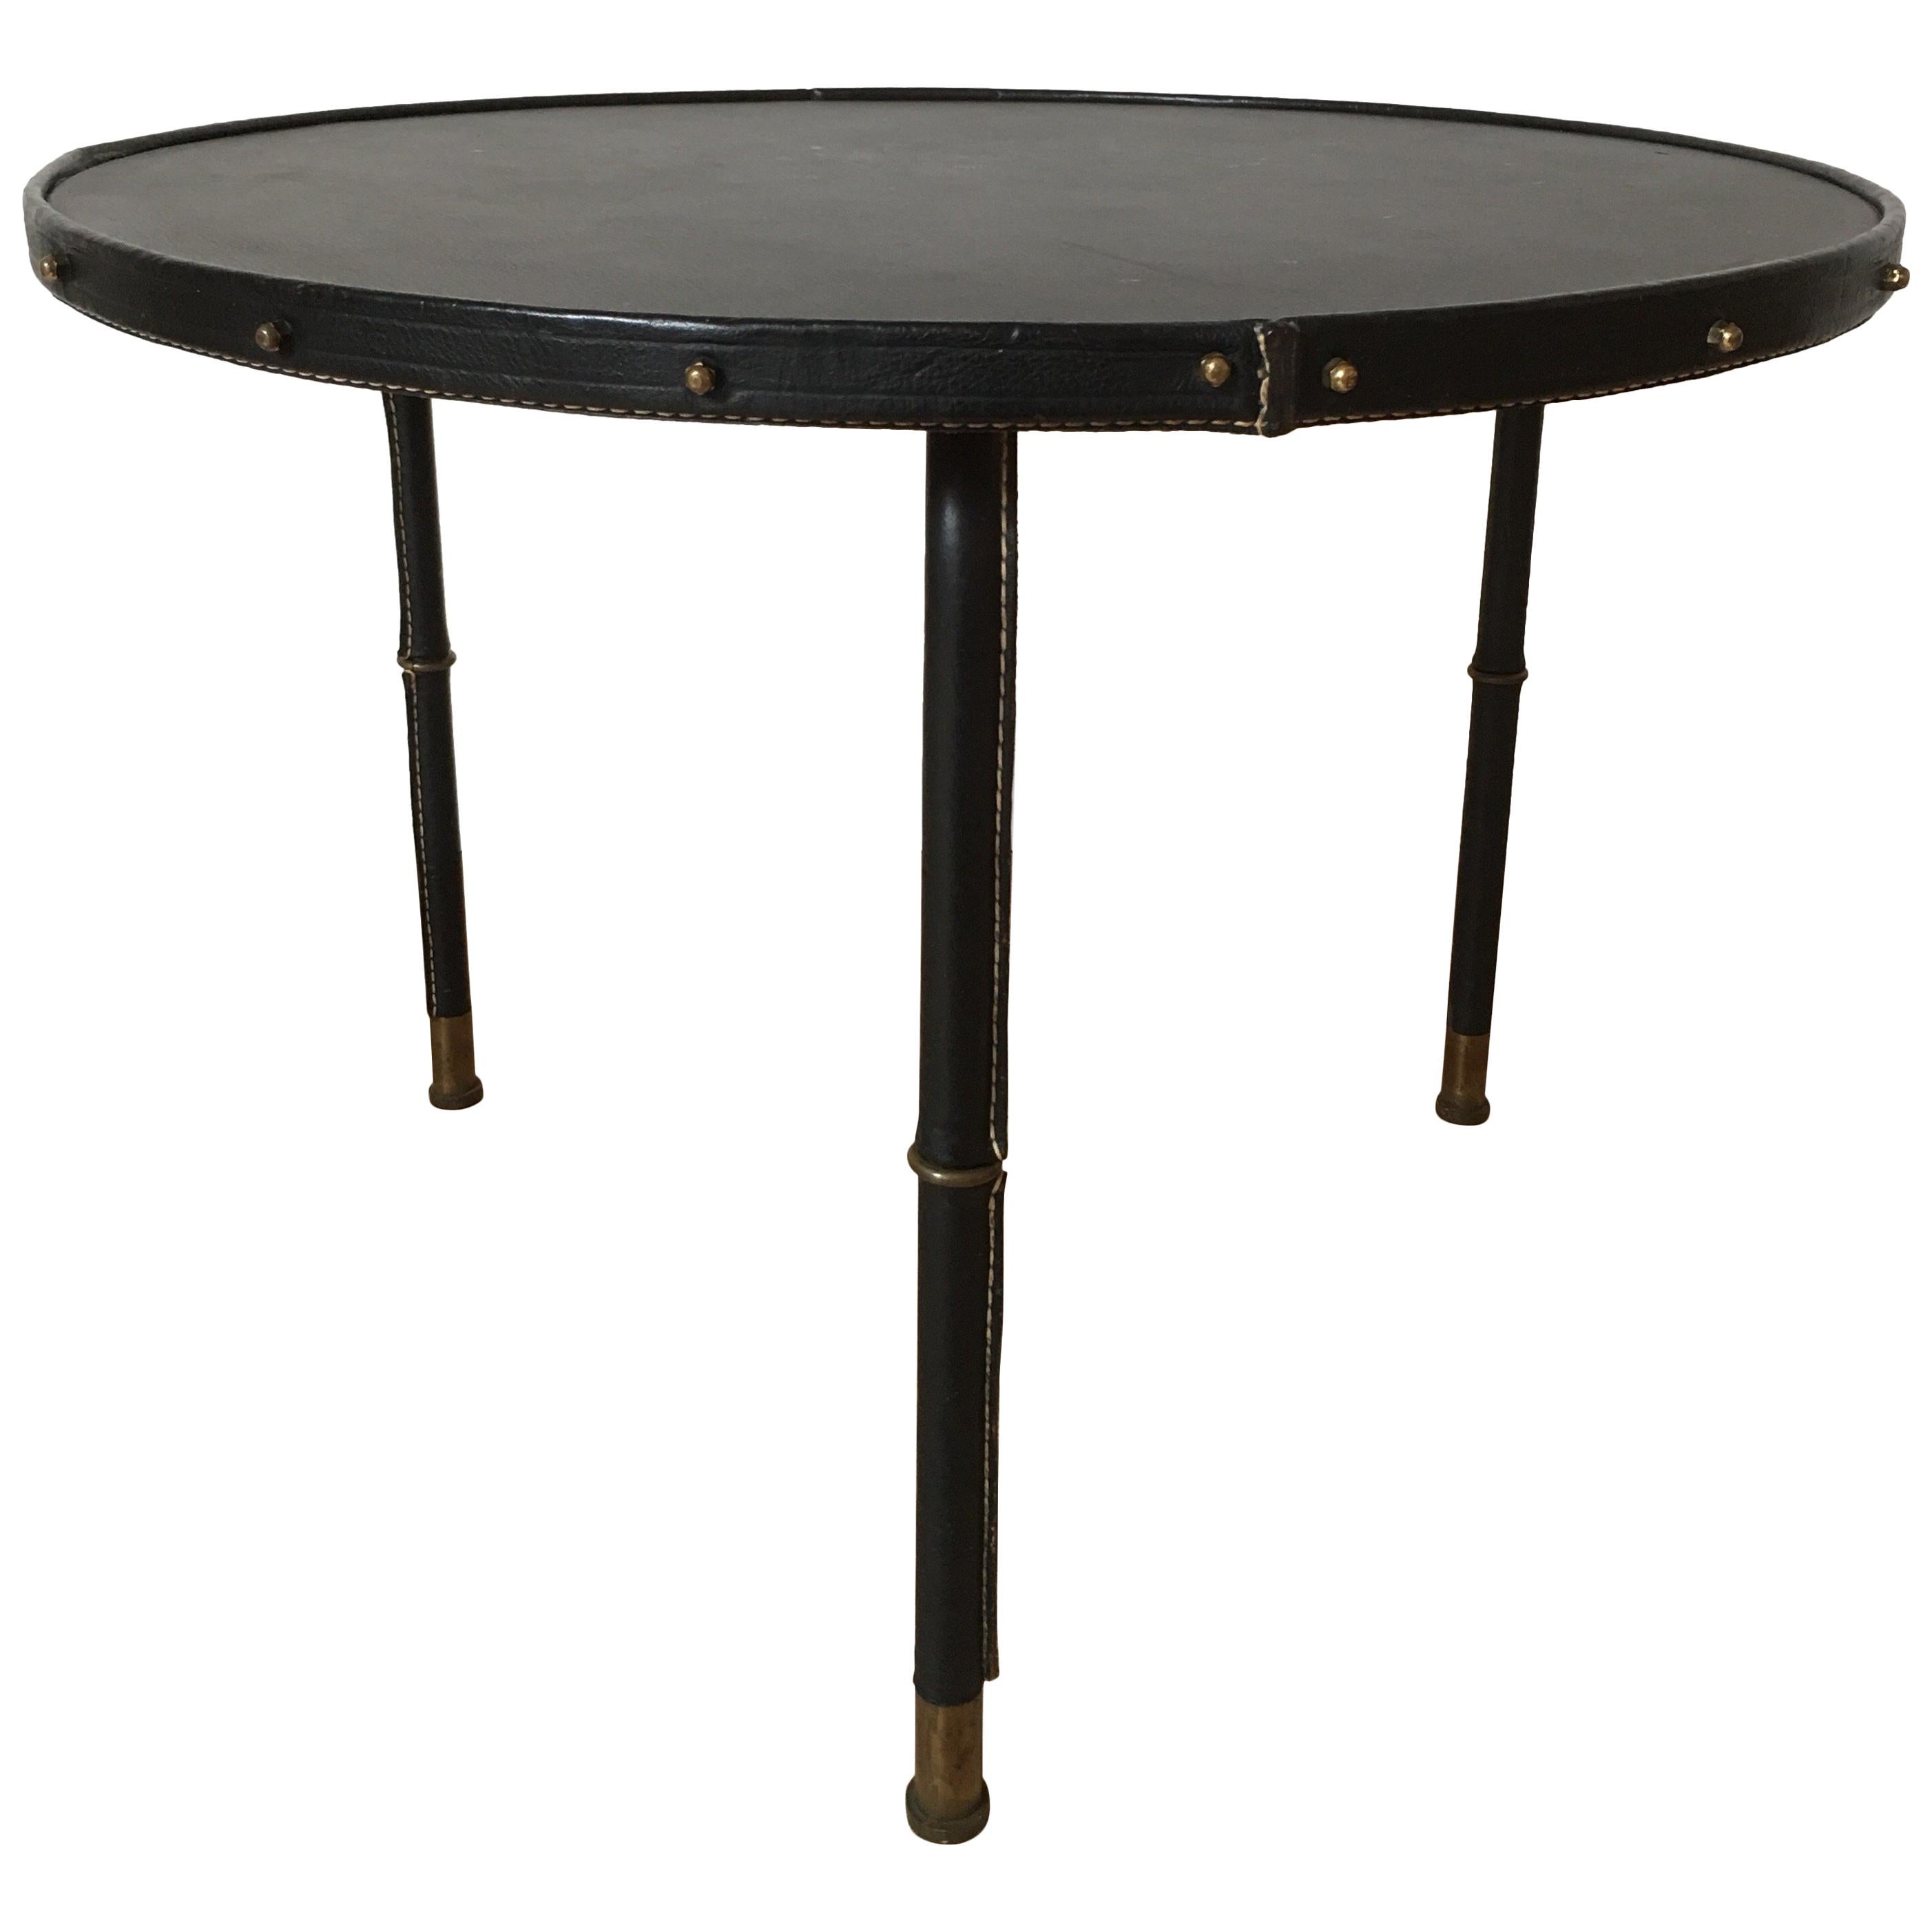 Jacques Adnet Attributed Bambou Design Legs and Black Leather Low Table, 1950s For Sale